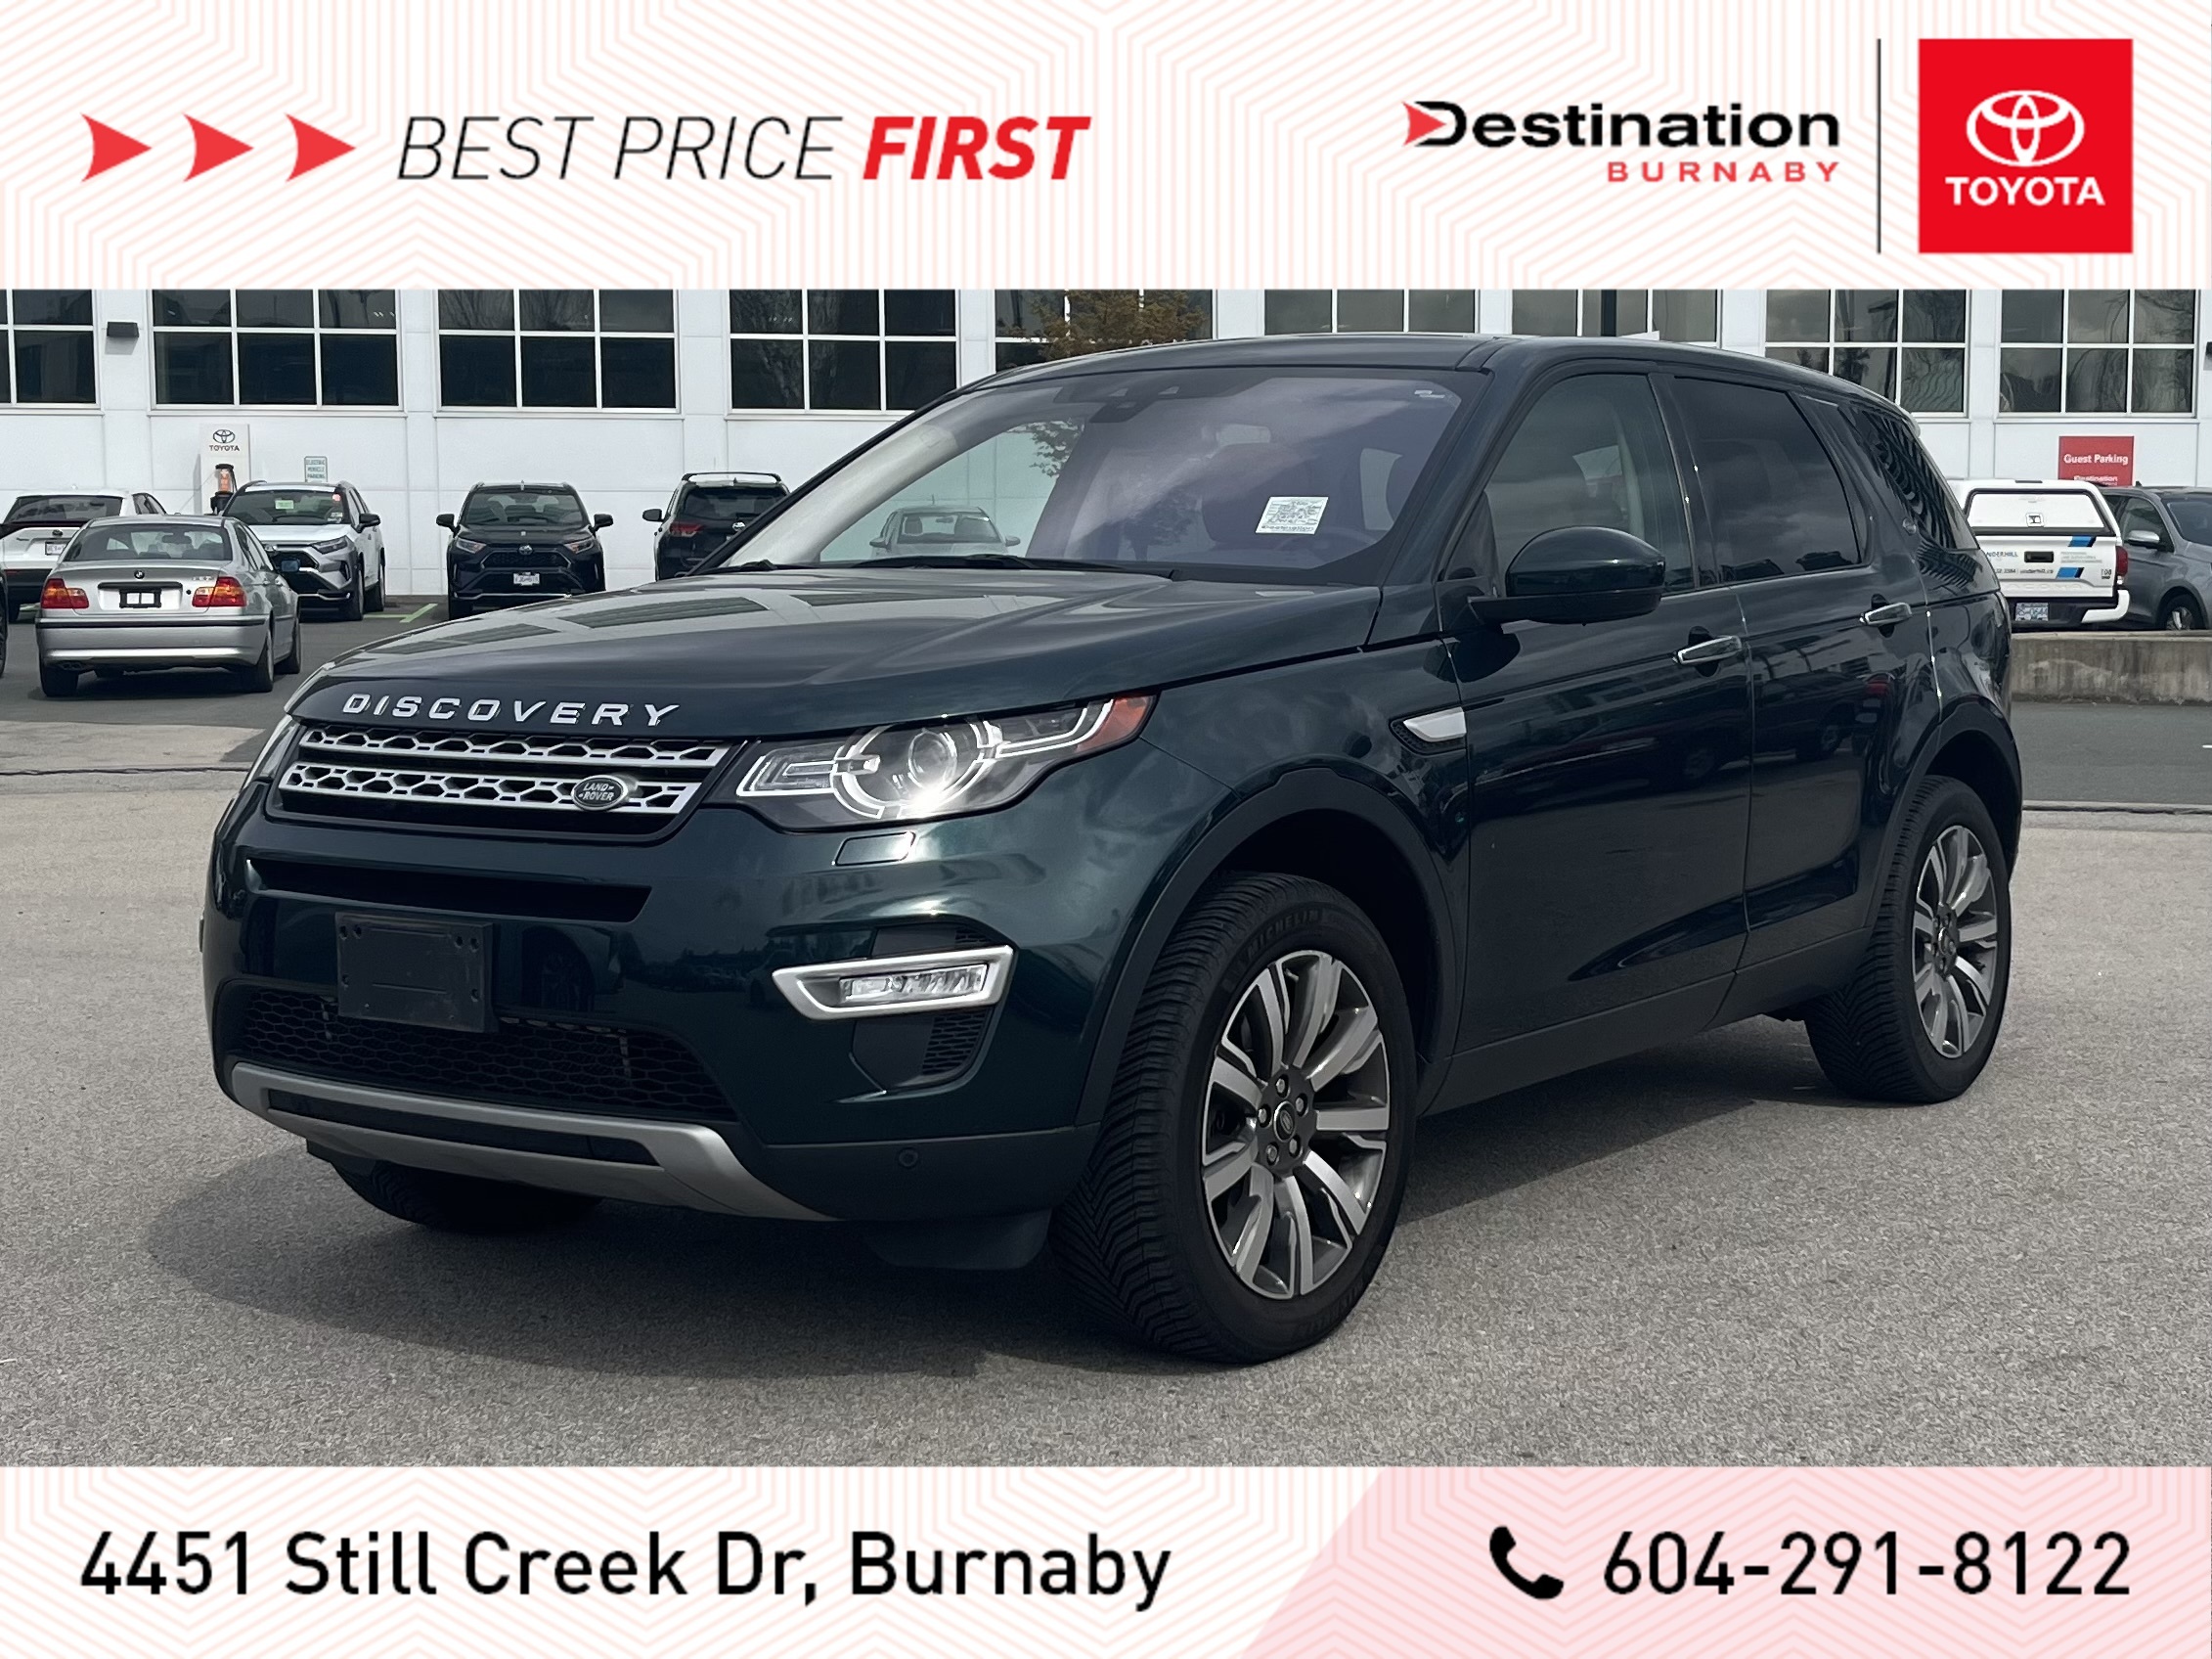 2017 Land Rover Discovery Sport Discovery Sport HSE Luxury, Low Kms, Loaded